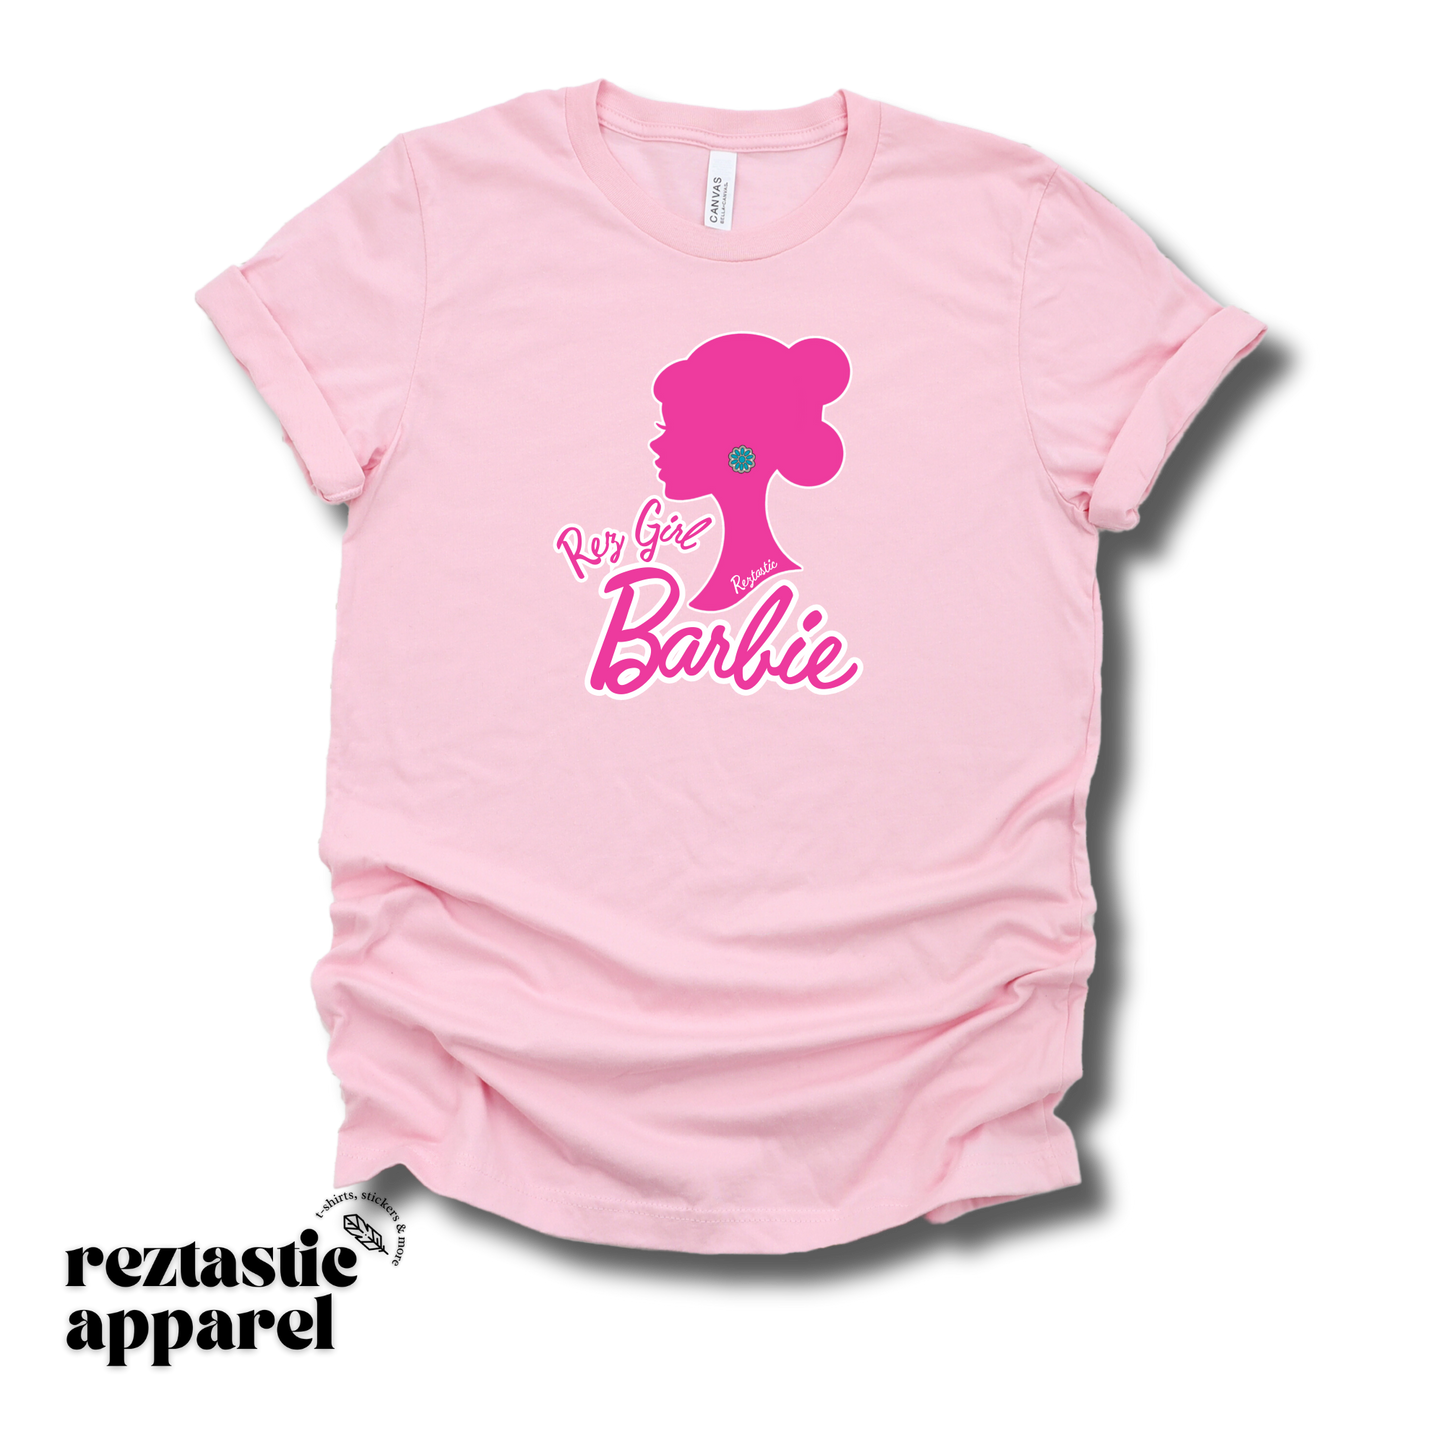 Barbie - T-Shirt- Youth